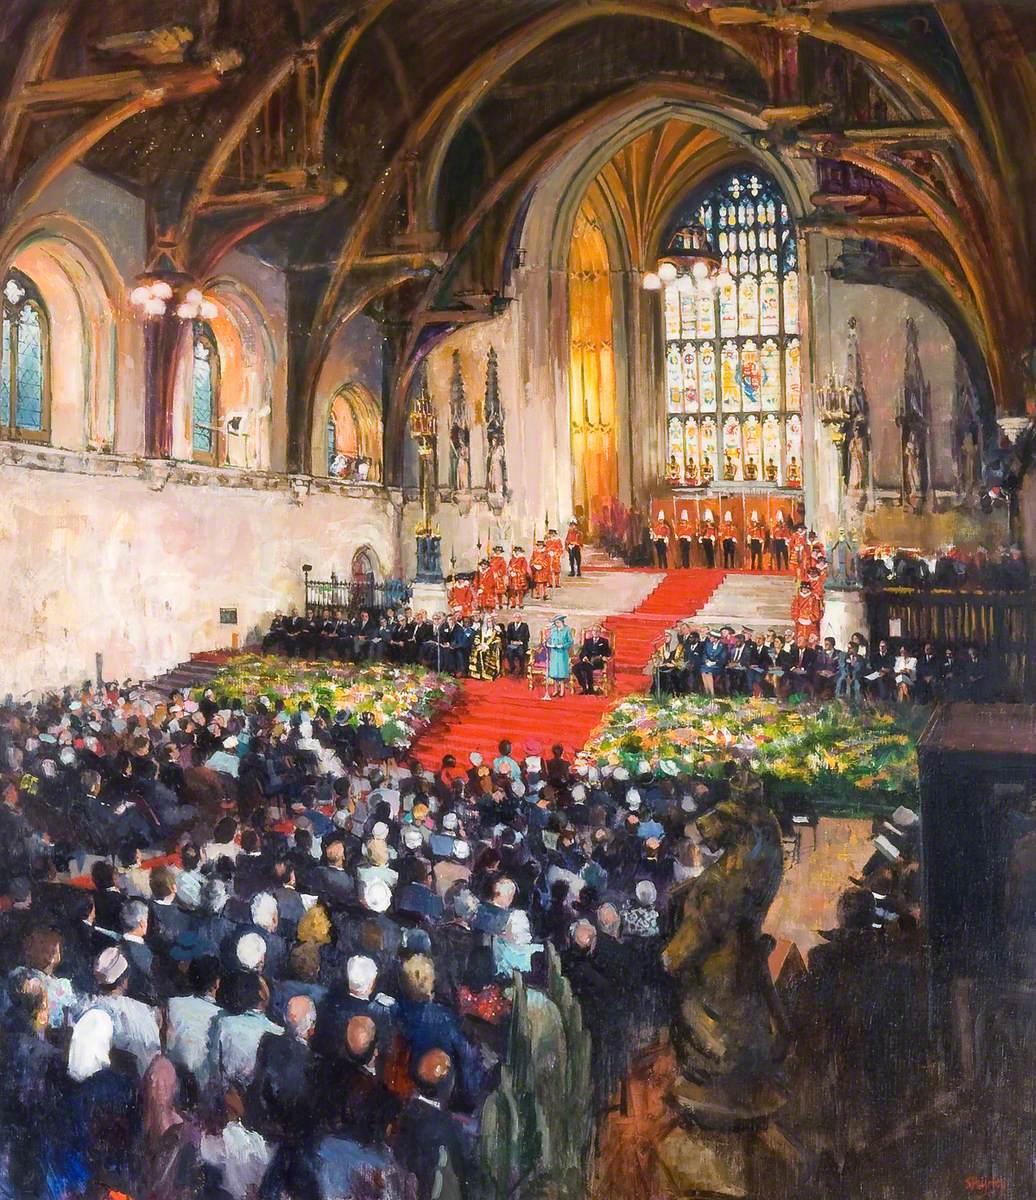 Opening of I. P. U. Centenary Conference in Westminster Hall, 1989